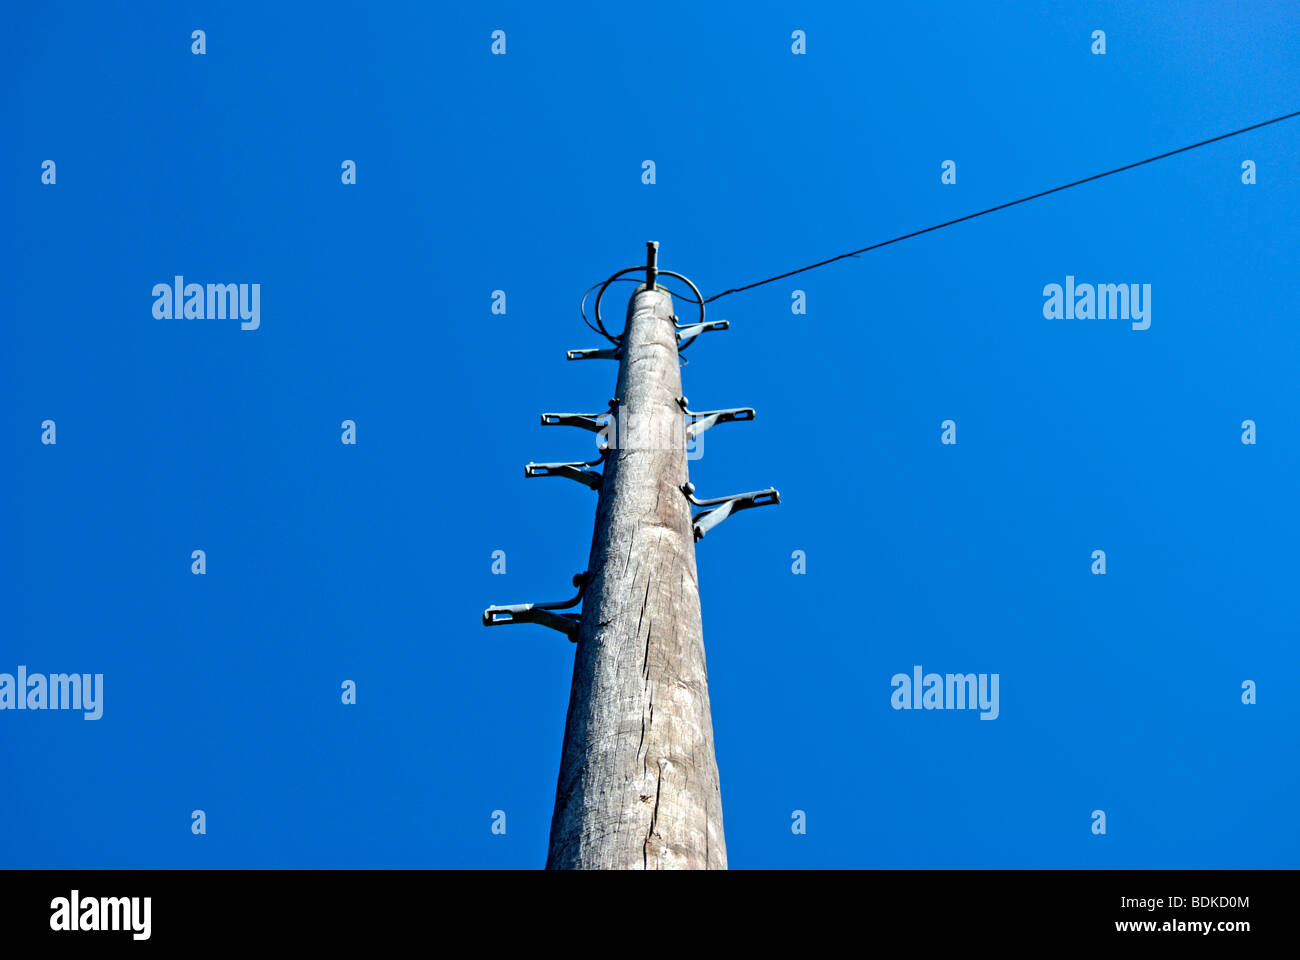 british wooden telegraph pole with footgrips and cable seen against a blue sky Stock Photo